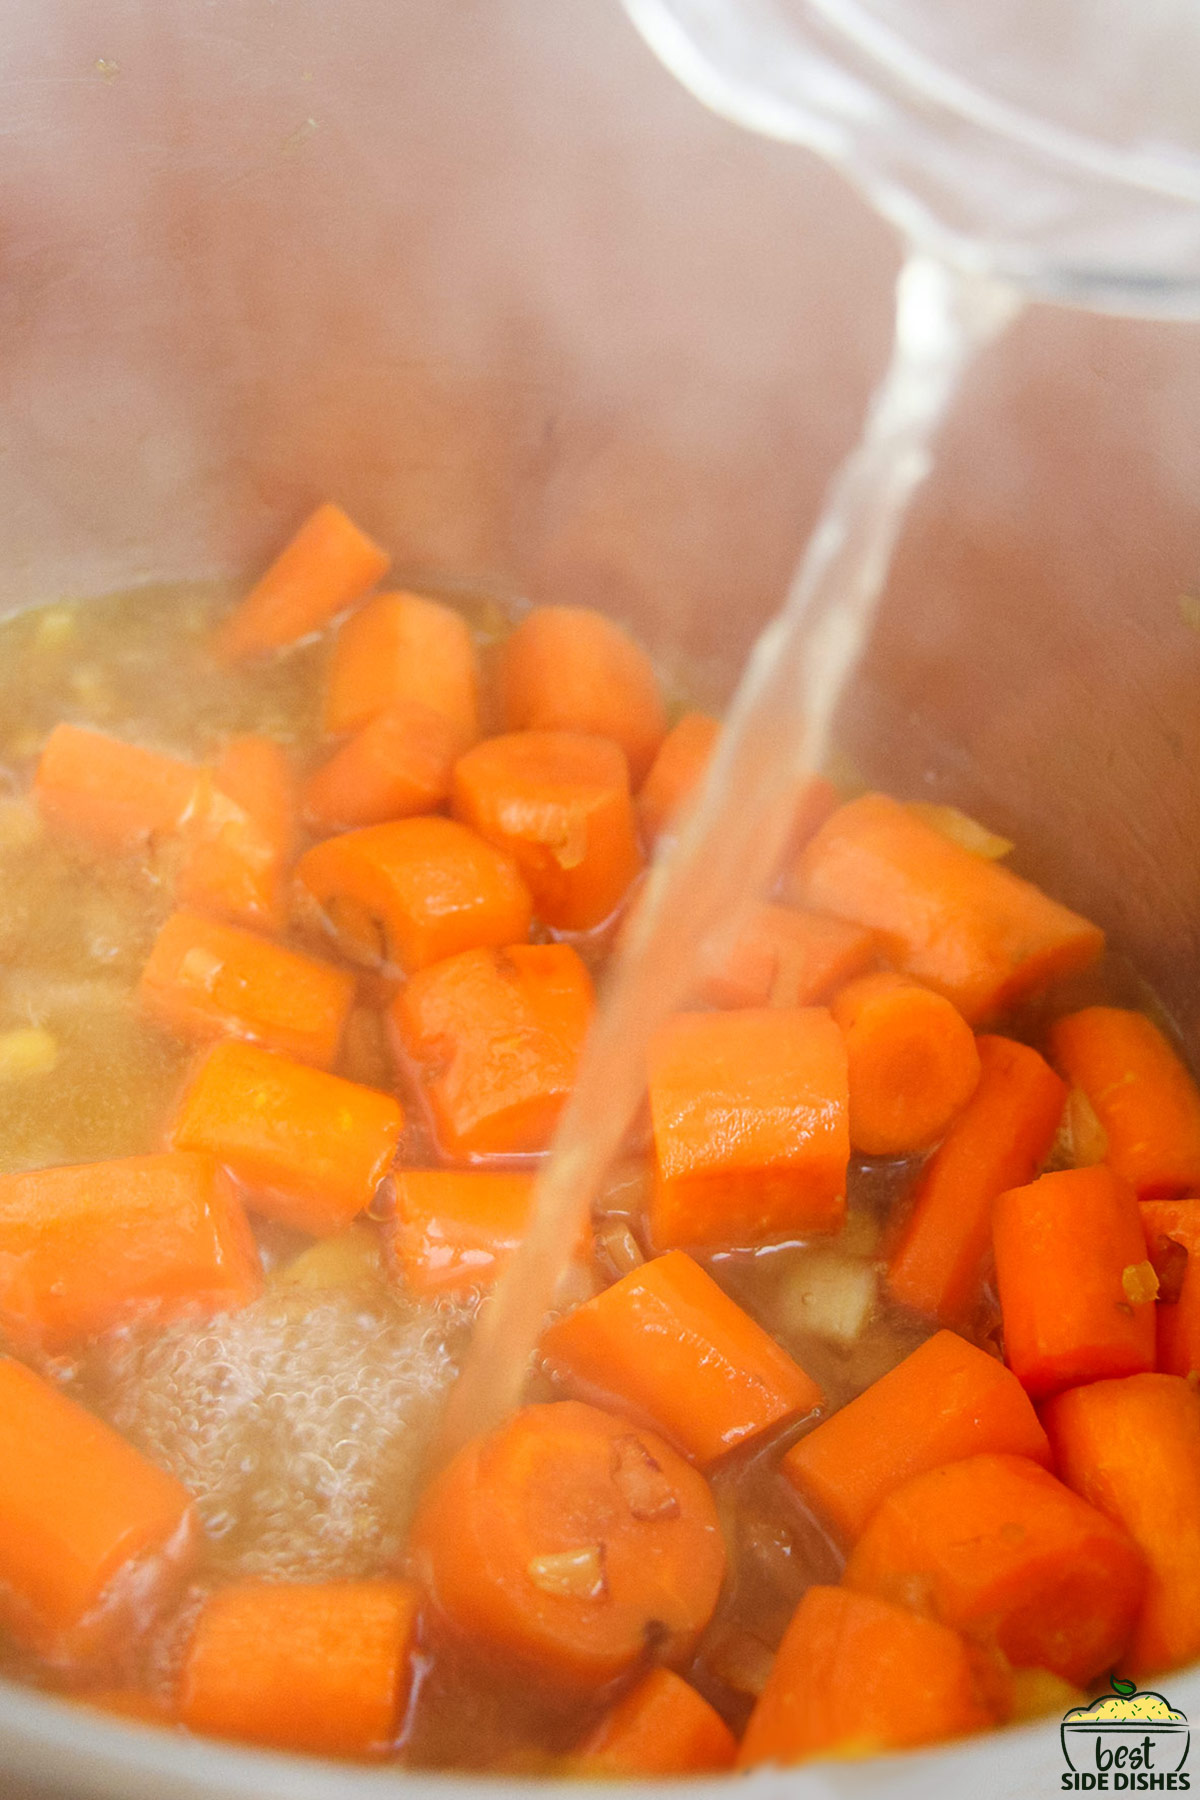 broth being poured into an instant pot full of carrots and onions